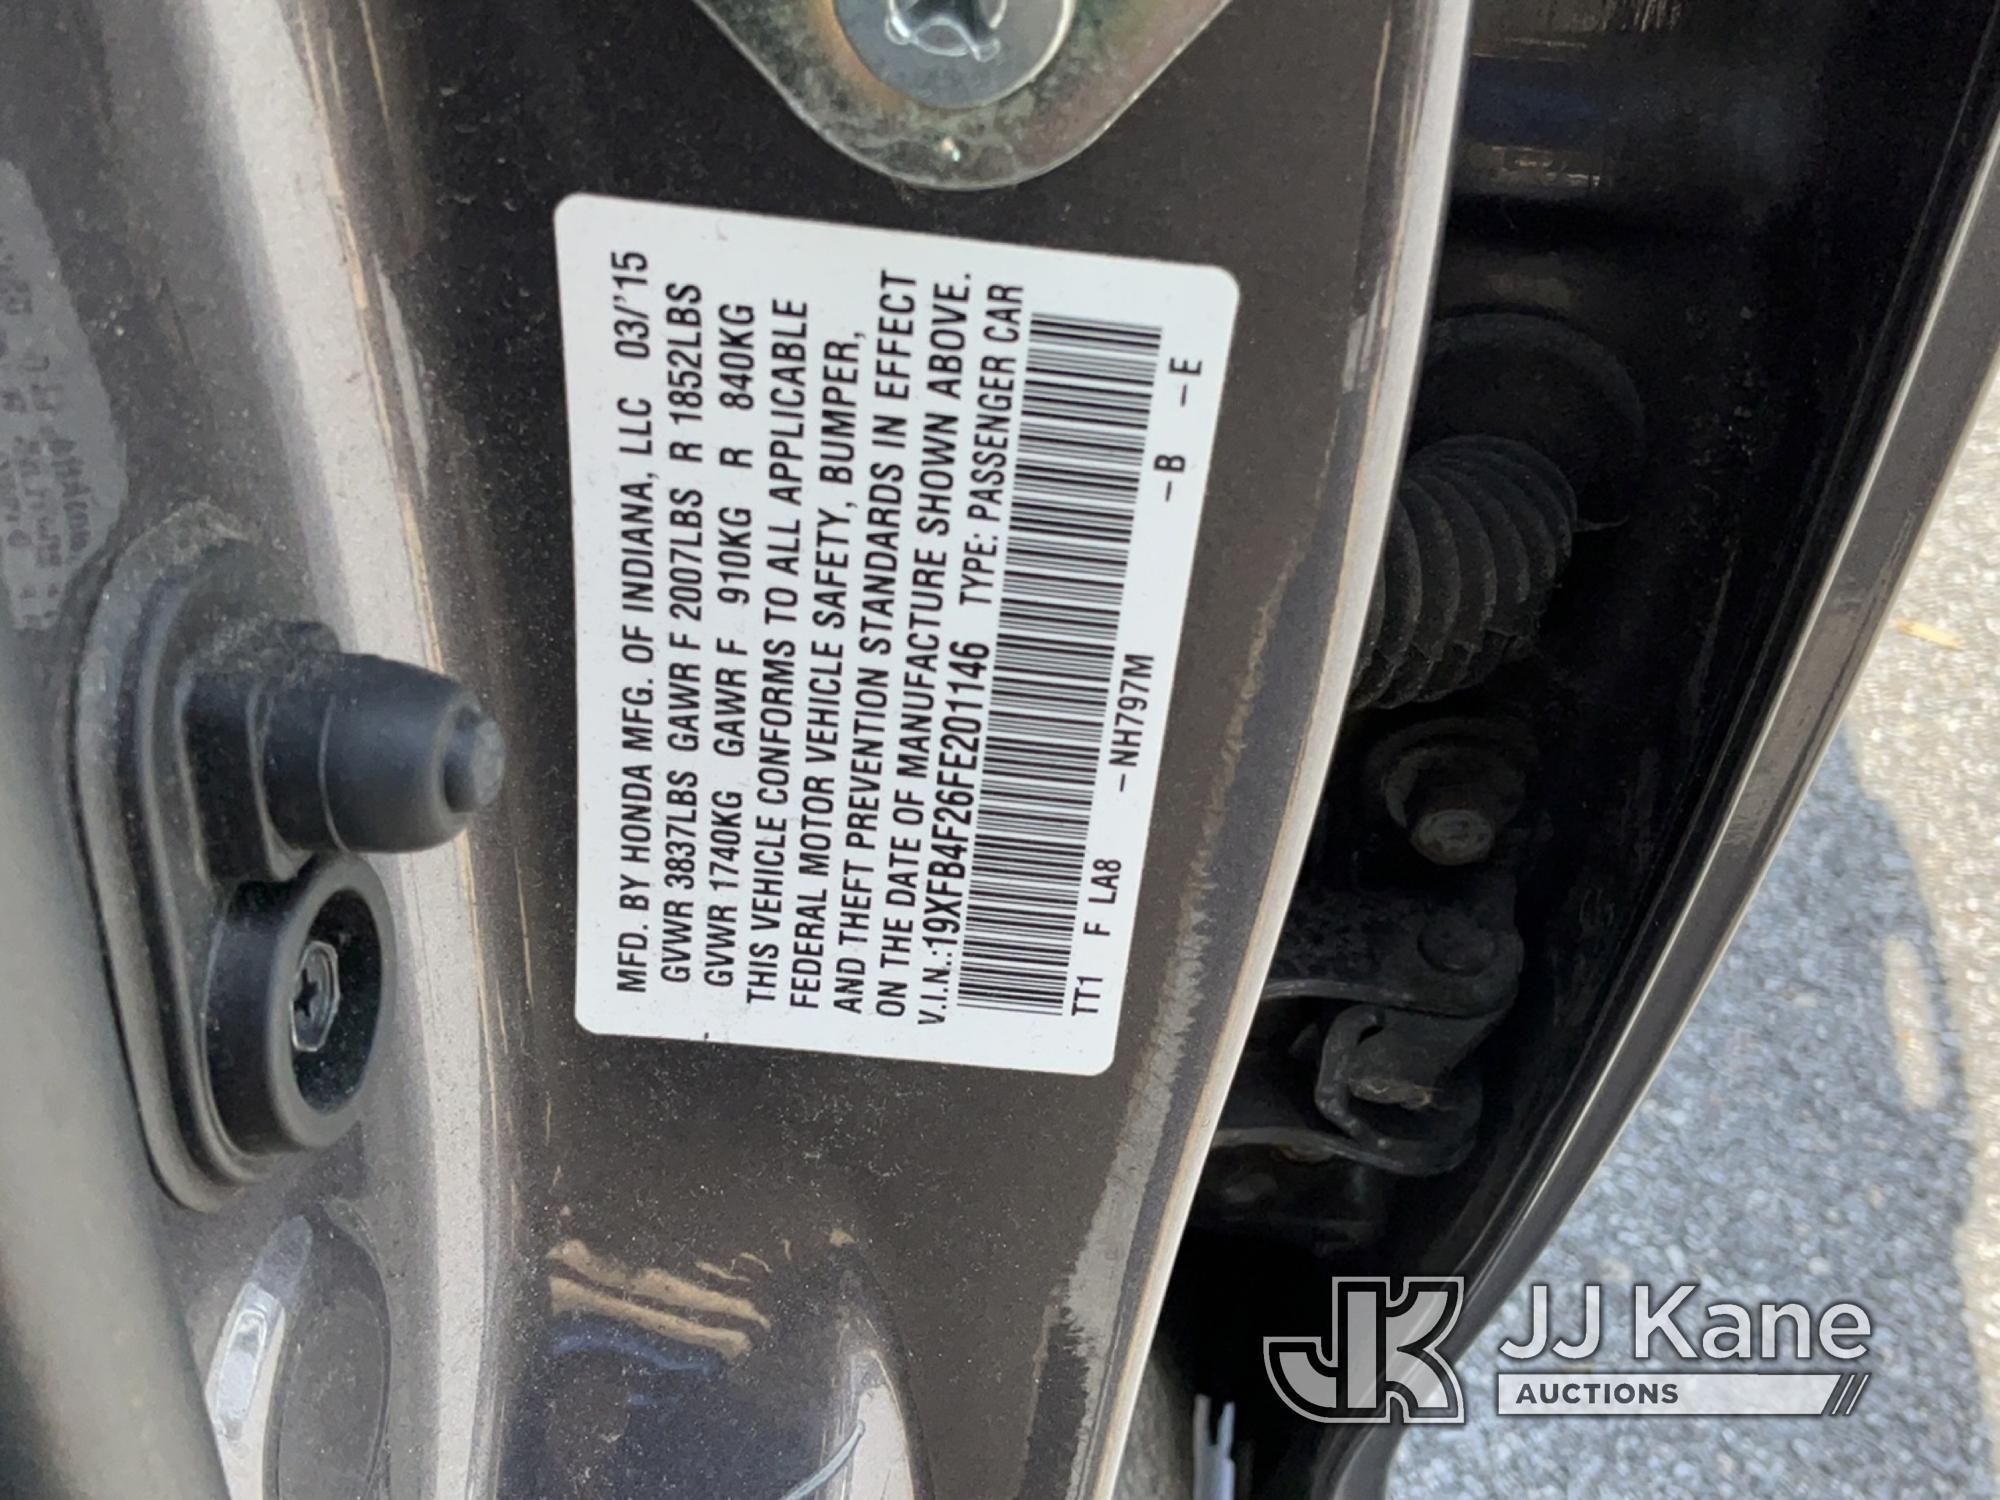 (Chester Springs, PA) 2015 Honda Civic Hybrid 4-Door Sedan Did Run & Move, Out of gas, Not Running,